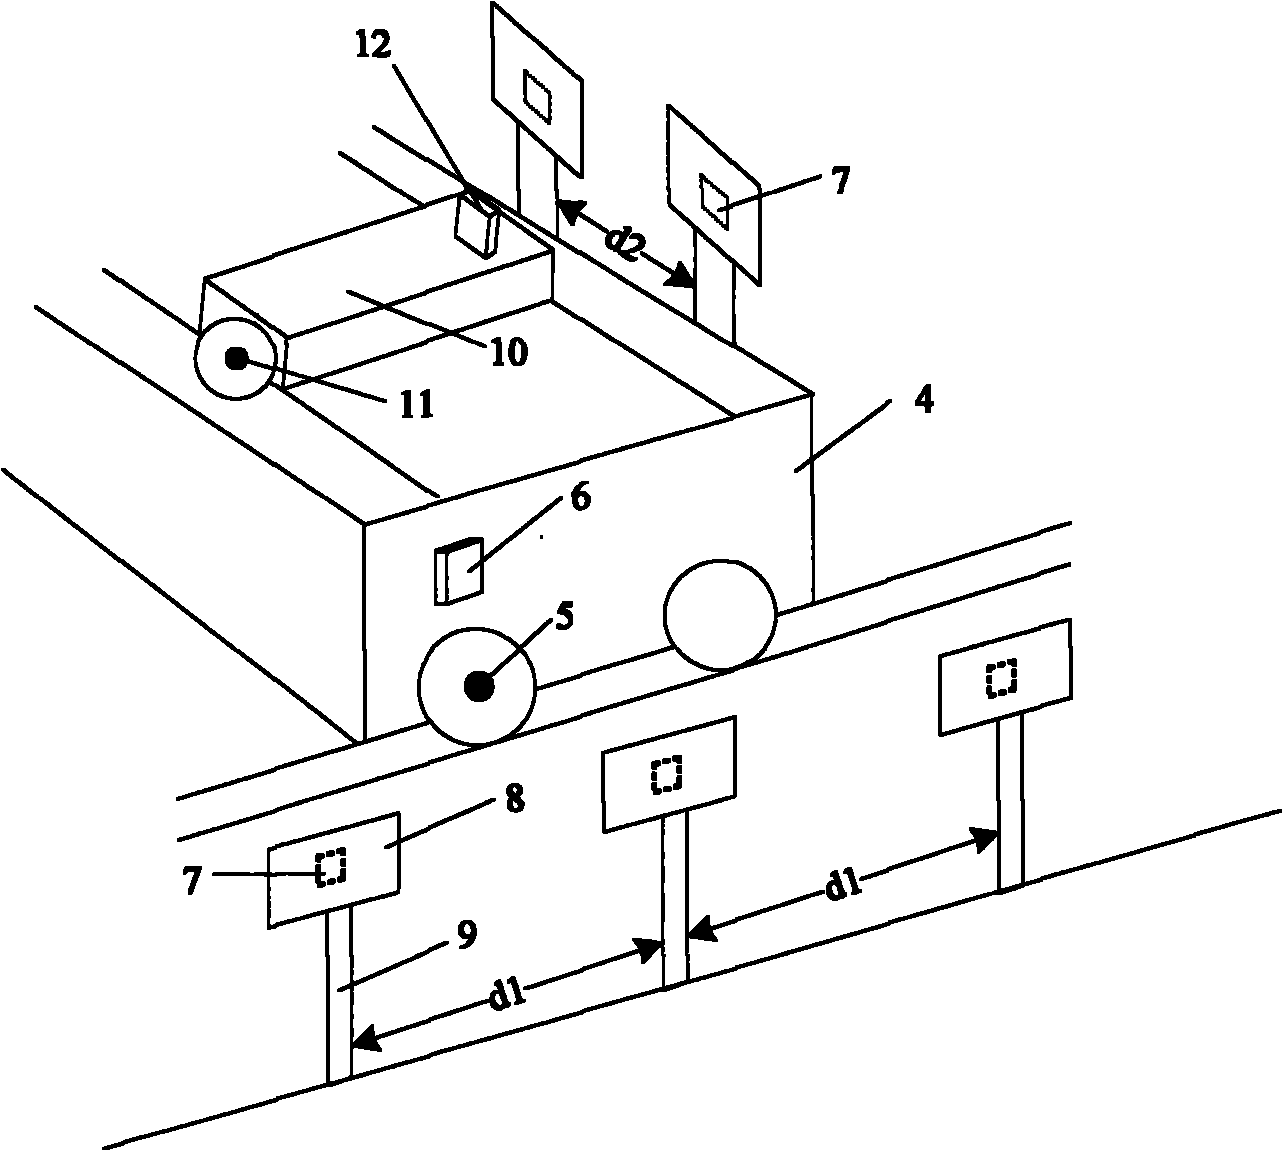 Traveling crane position tracking device based on radio frequency identification